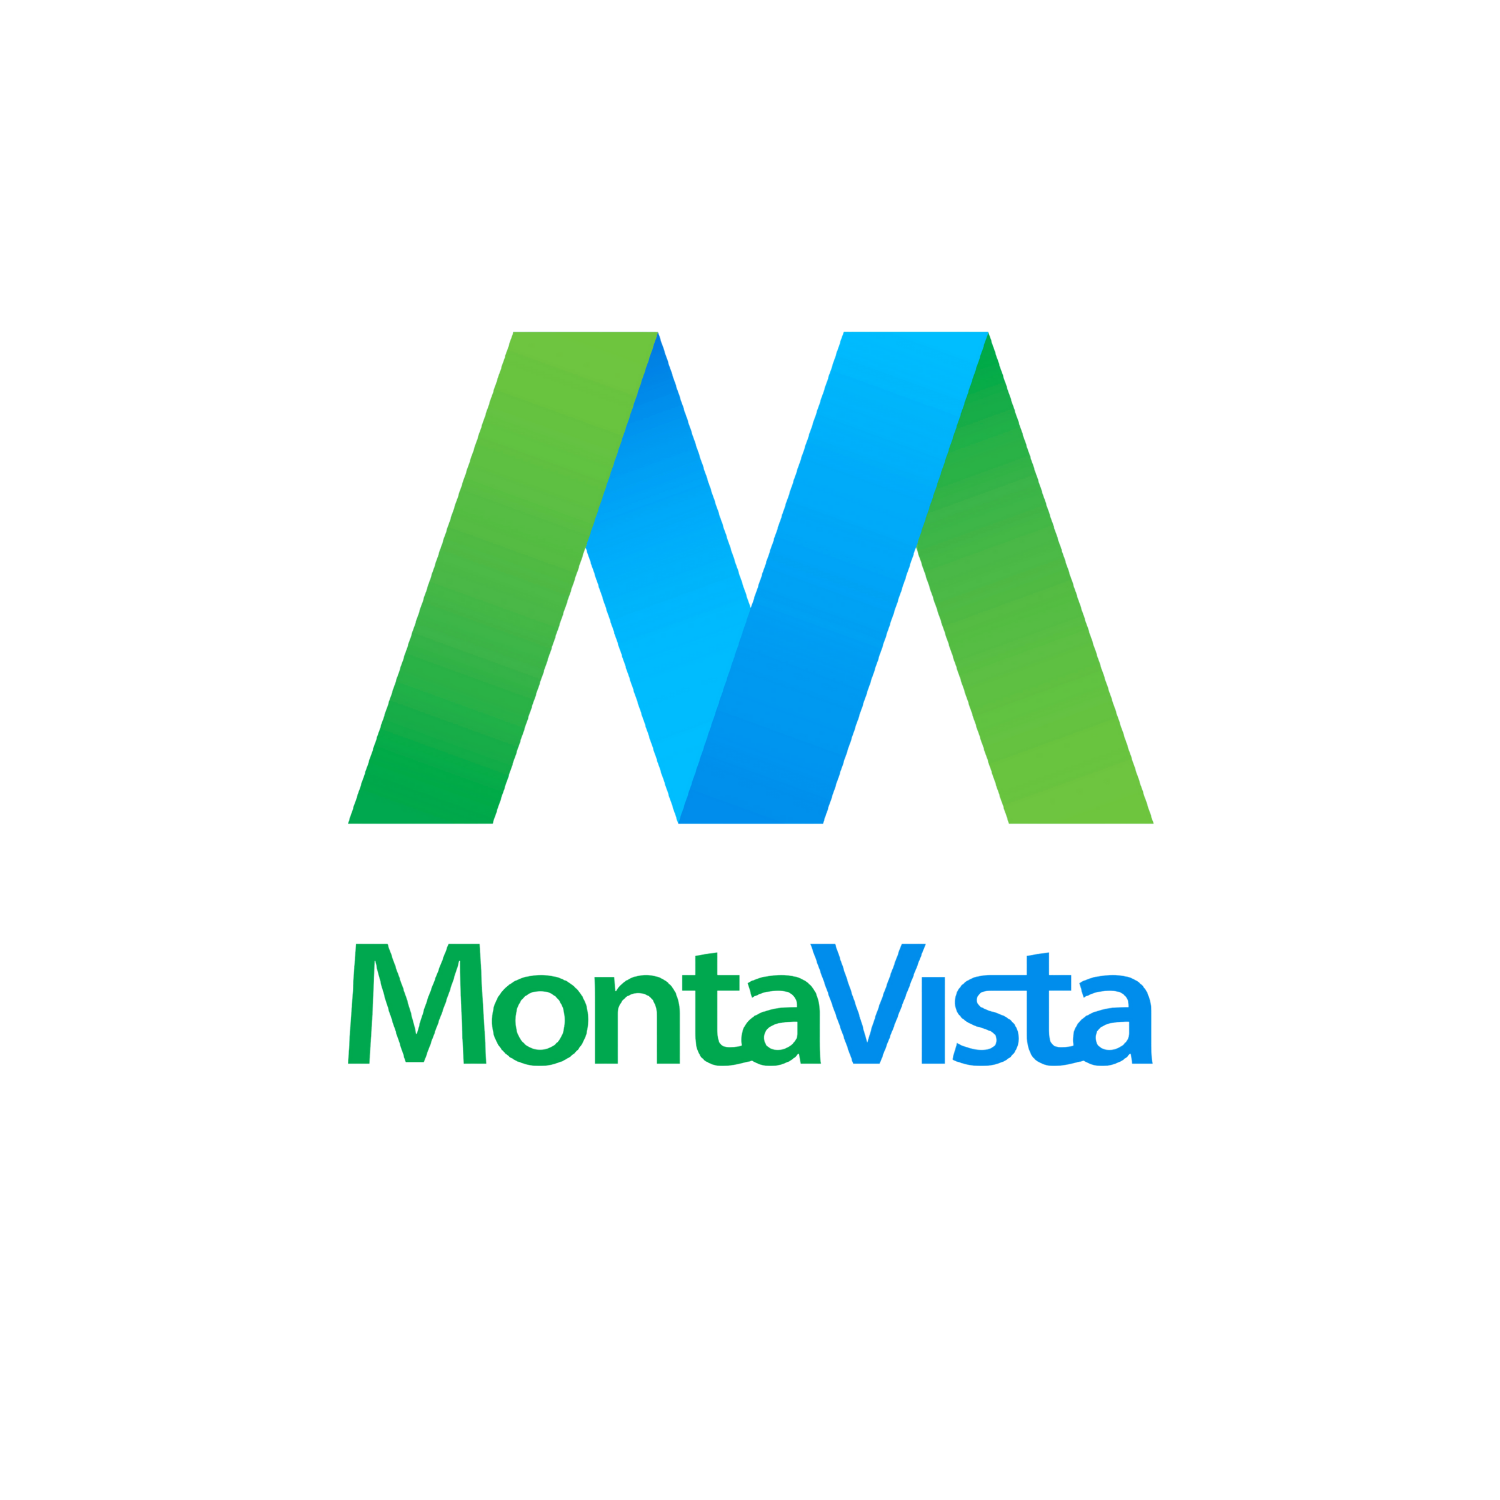 Grundfos Selects MontaVista CGX as a Linux Solution for Their Industrial Multi Pump Controller